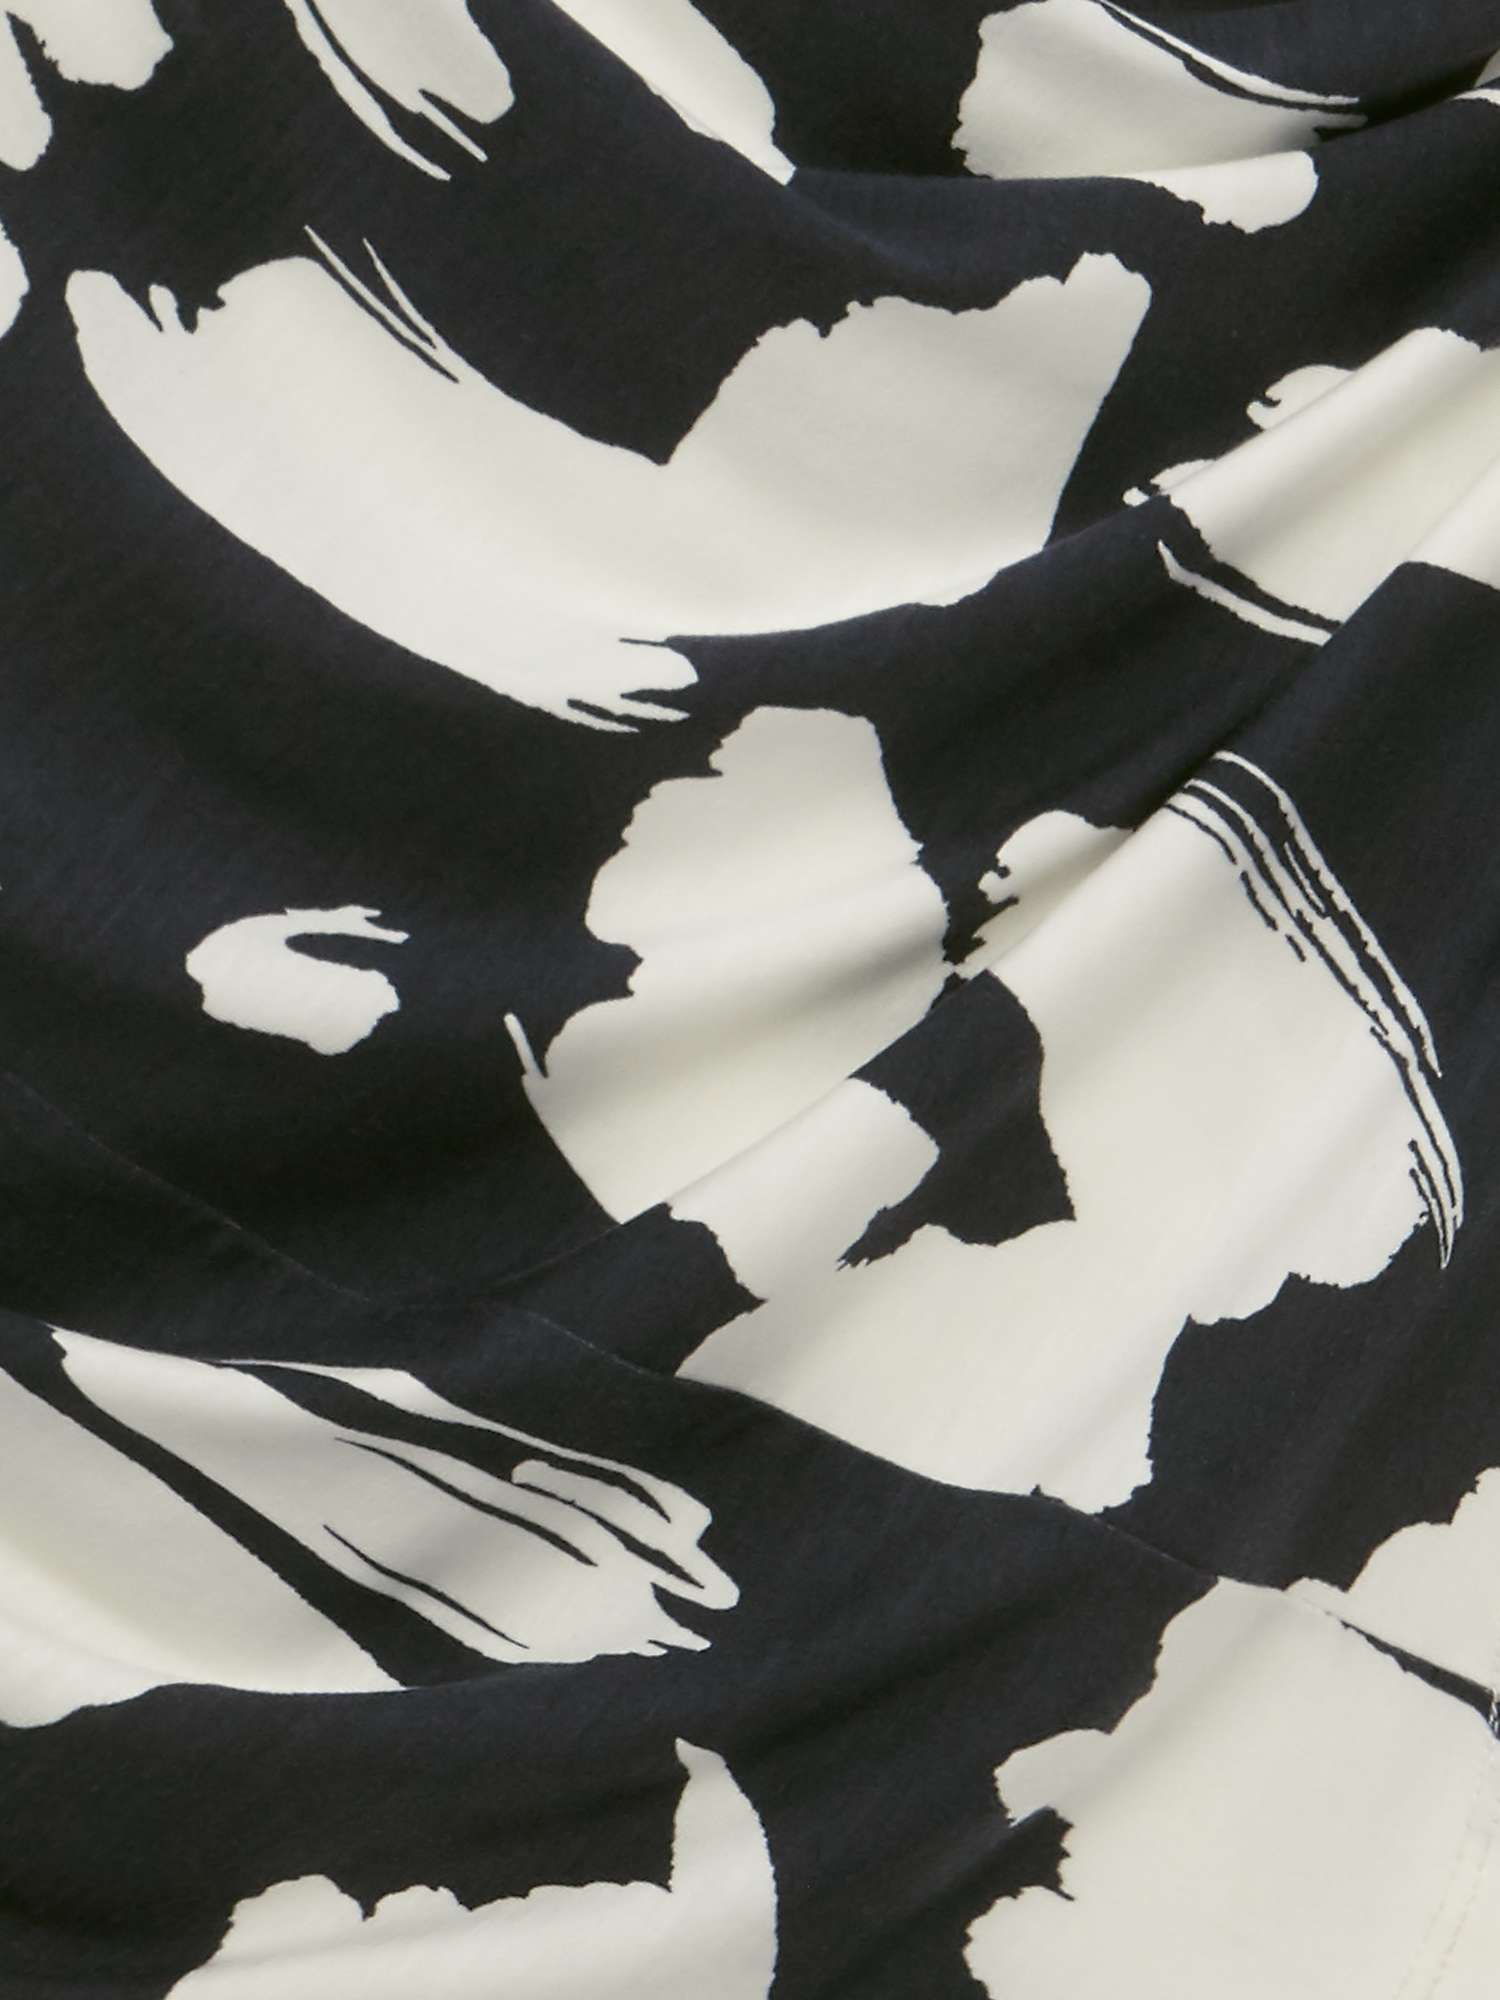 Buy Phase Eight Dotterel Abstract Print Dress, Carbon/Ivory Online at johnlewis.com